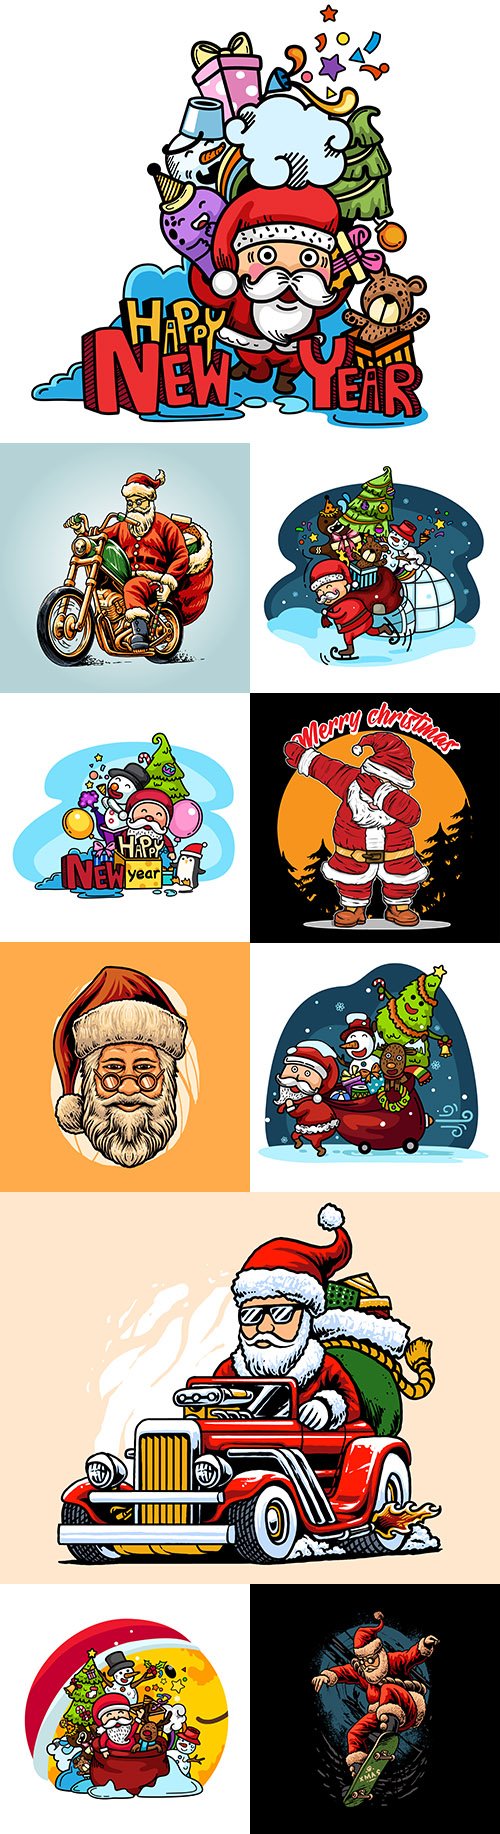 Santa Claus drawing with Christmas party and skateboarding